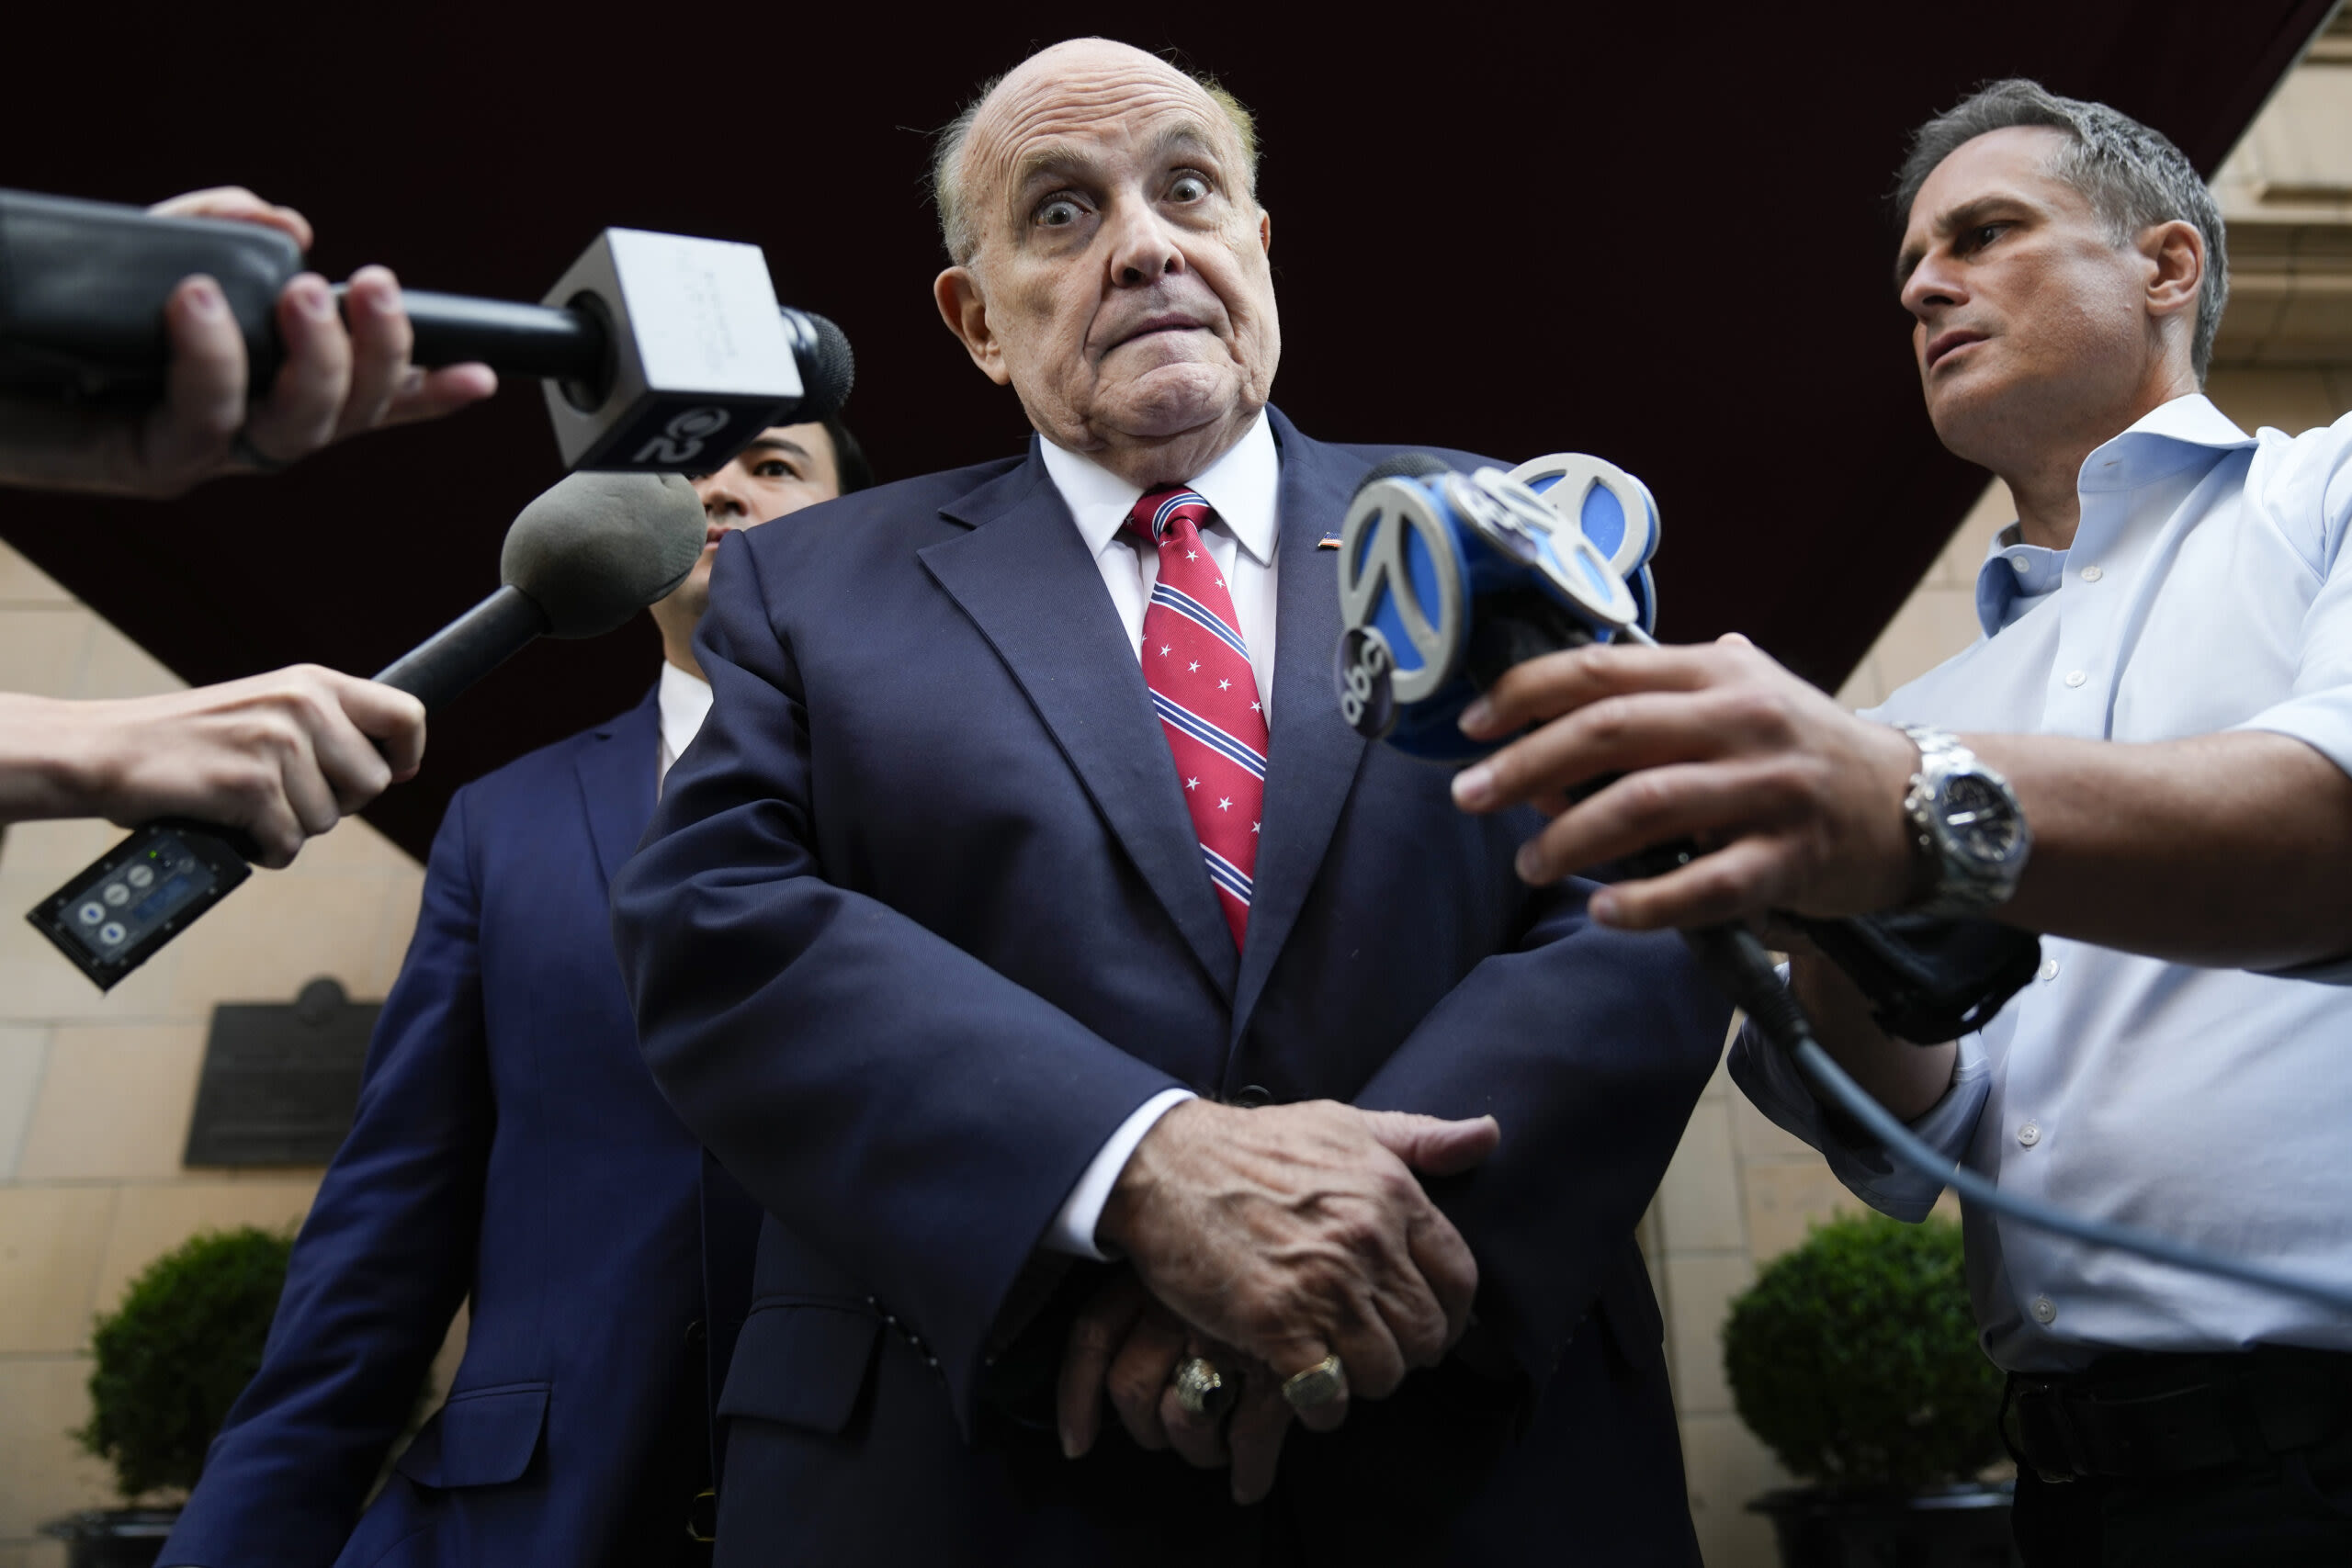 Rudy Giuliani On Brink of Losing Newsmax Show Over Election Lies